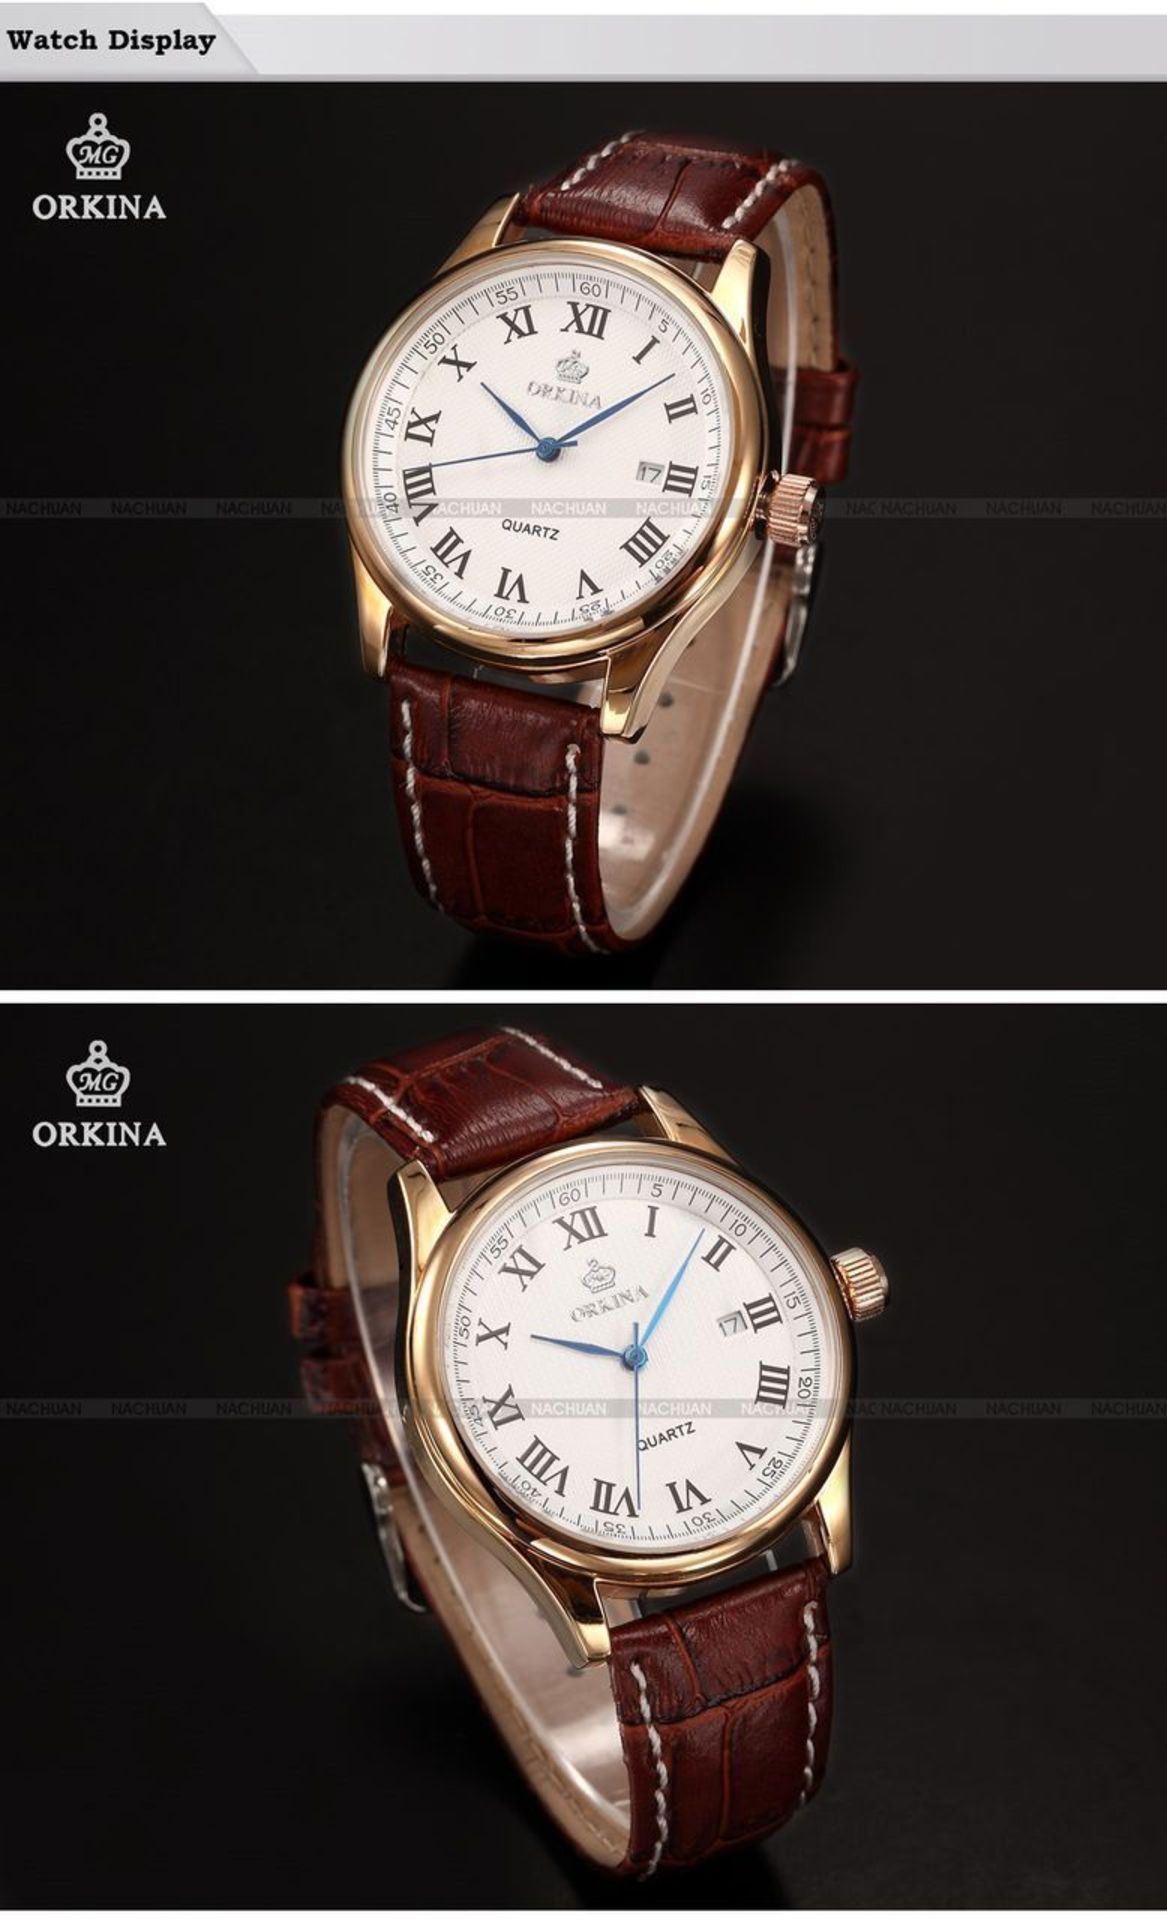 MENS ORKINA LUXURY WATCH WITH A GENUINE LEATHER STRAP *NO VAT* - Image 3 of 6